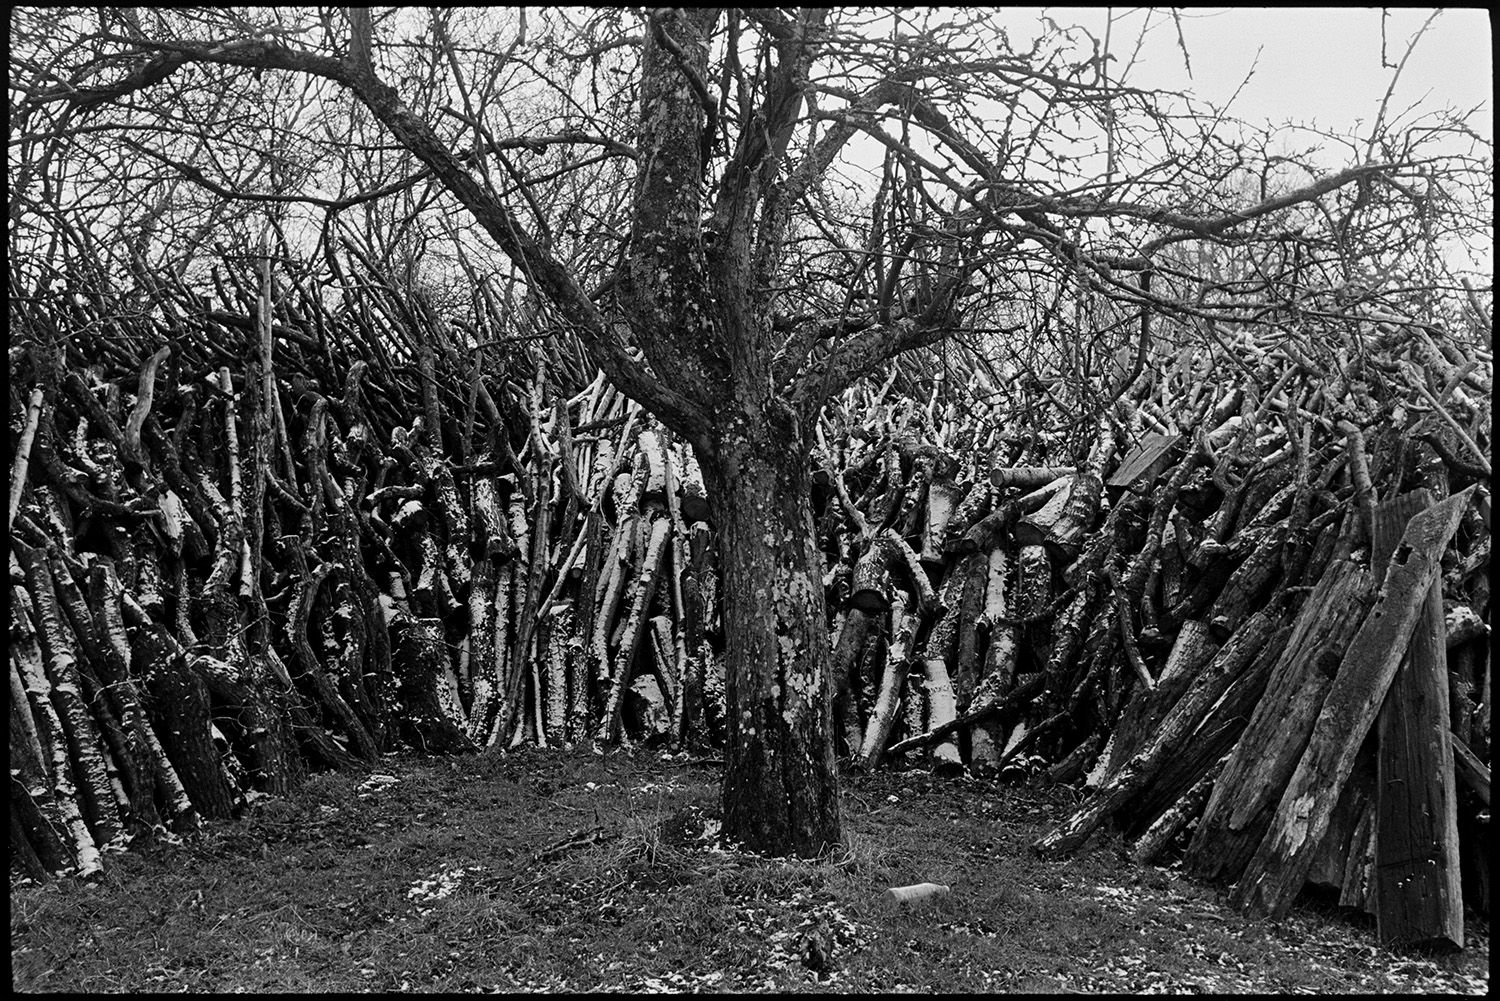 Large woodpile in old orchard light snow. 
[A large woodpile with a light dusting of snow in an orchard at Middle Week, Iddesleigh. An apple tree can be seen in the foreground.]